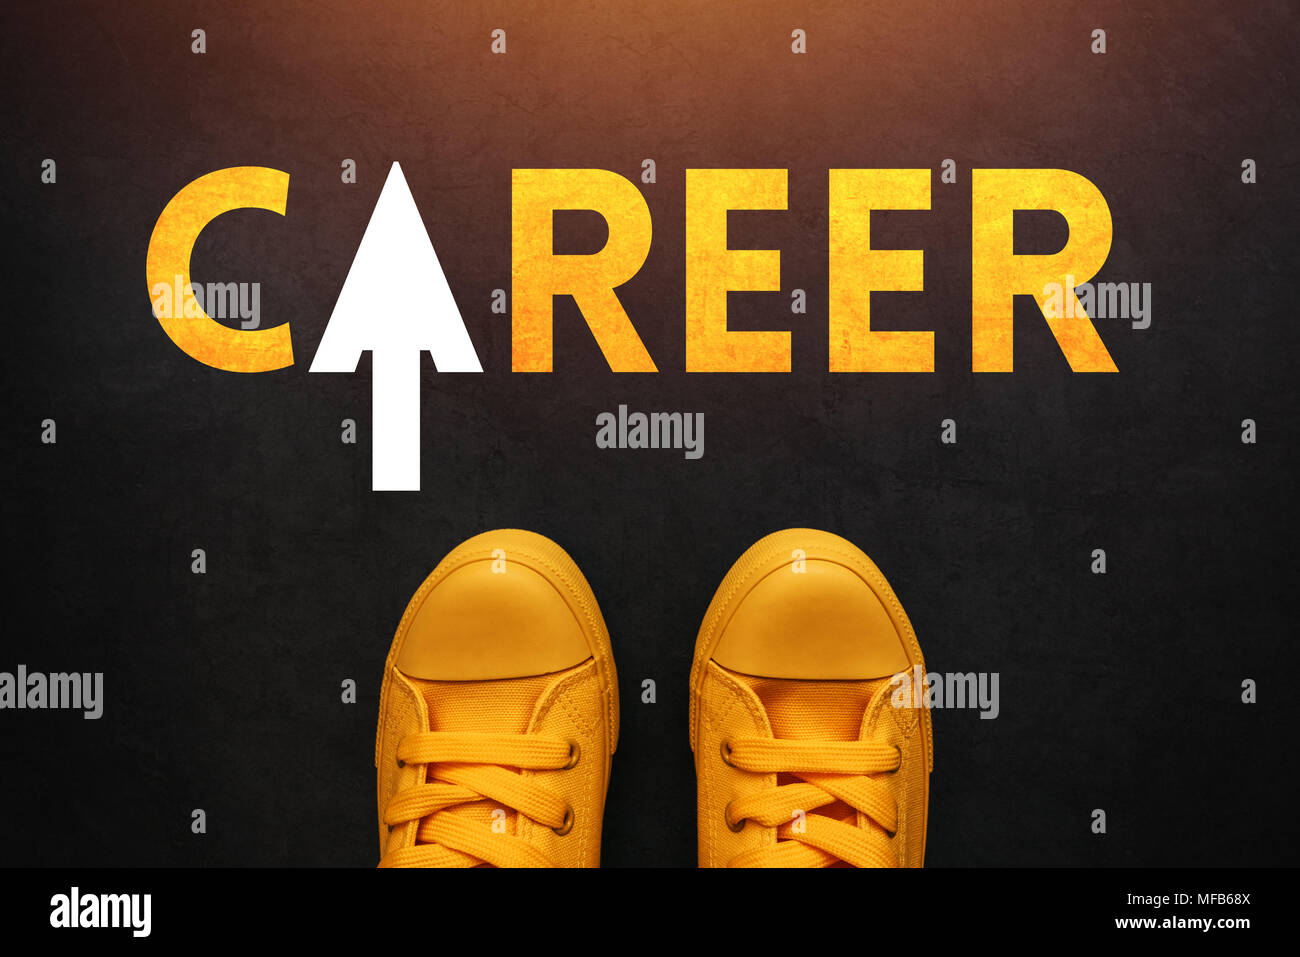 Career seeker looking for a job, conceptual image with young unemployed person in yellow sneakers standing Stock Photo